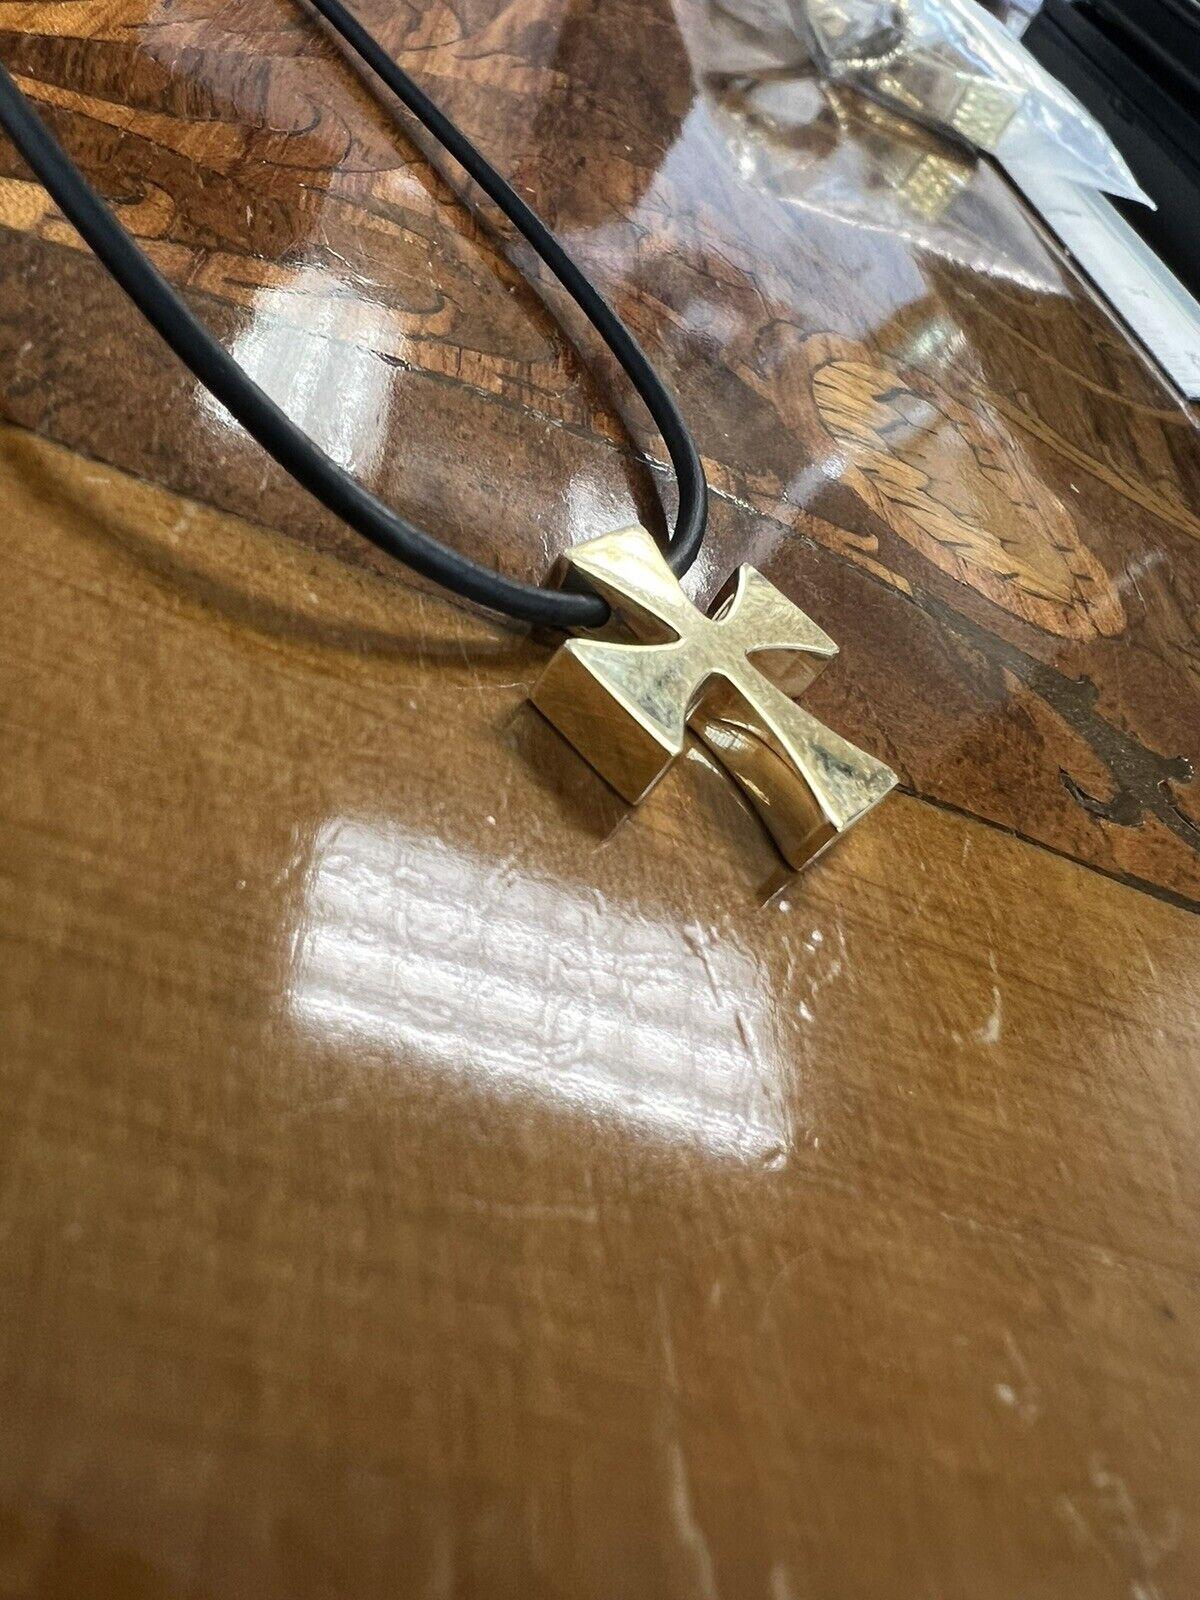 iffany & Co. 18k Yellow Gold Maltese Cross Necklace Vintage

Here is your chance to purchase a beautiful and highly collectible designer necklace
.      
[Brand]
Tiffany&Co.

[Material]
18K/750/Yellow Gold/
Unknown

[Weight]
11.1g

[Size]
Necklace